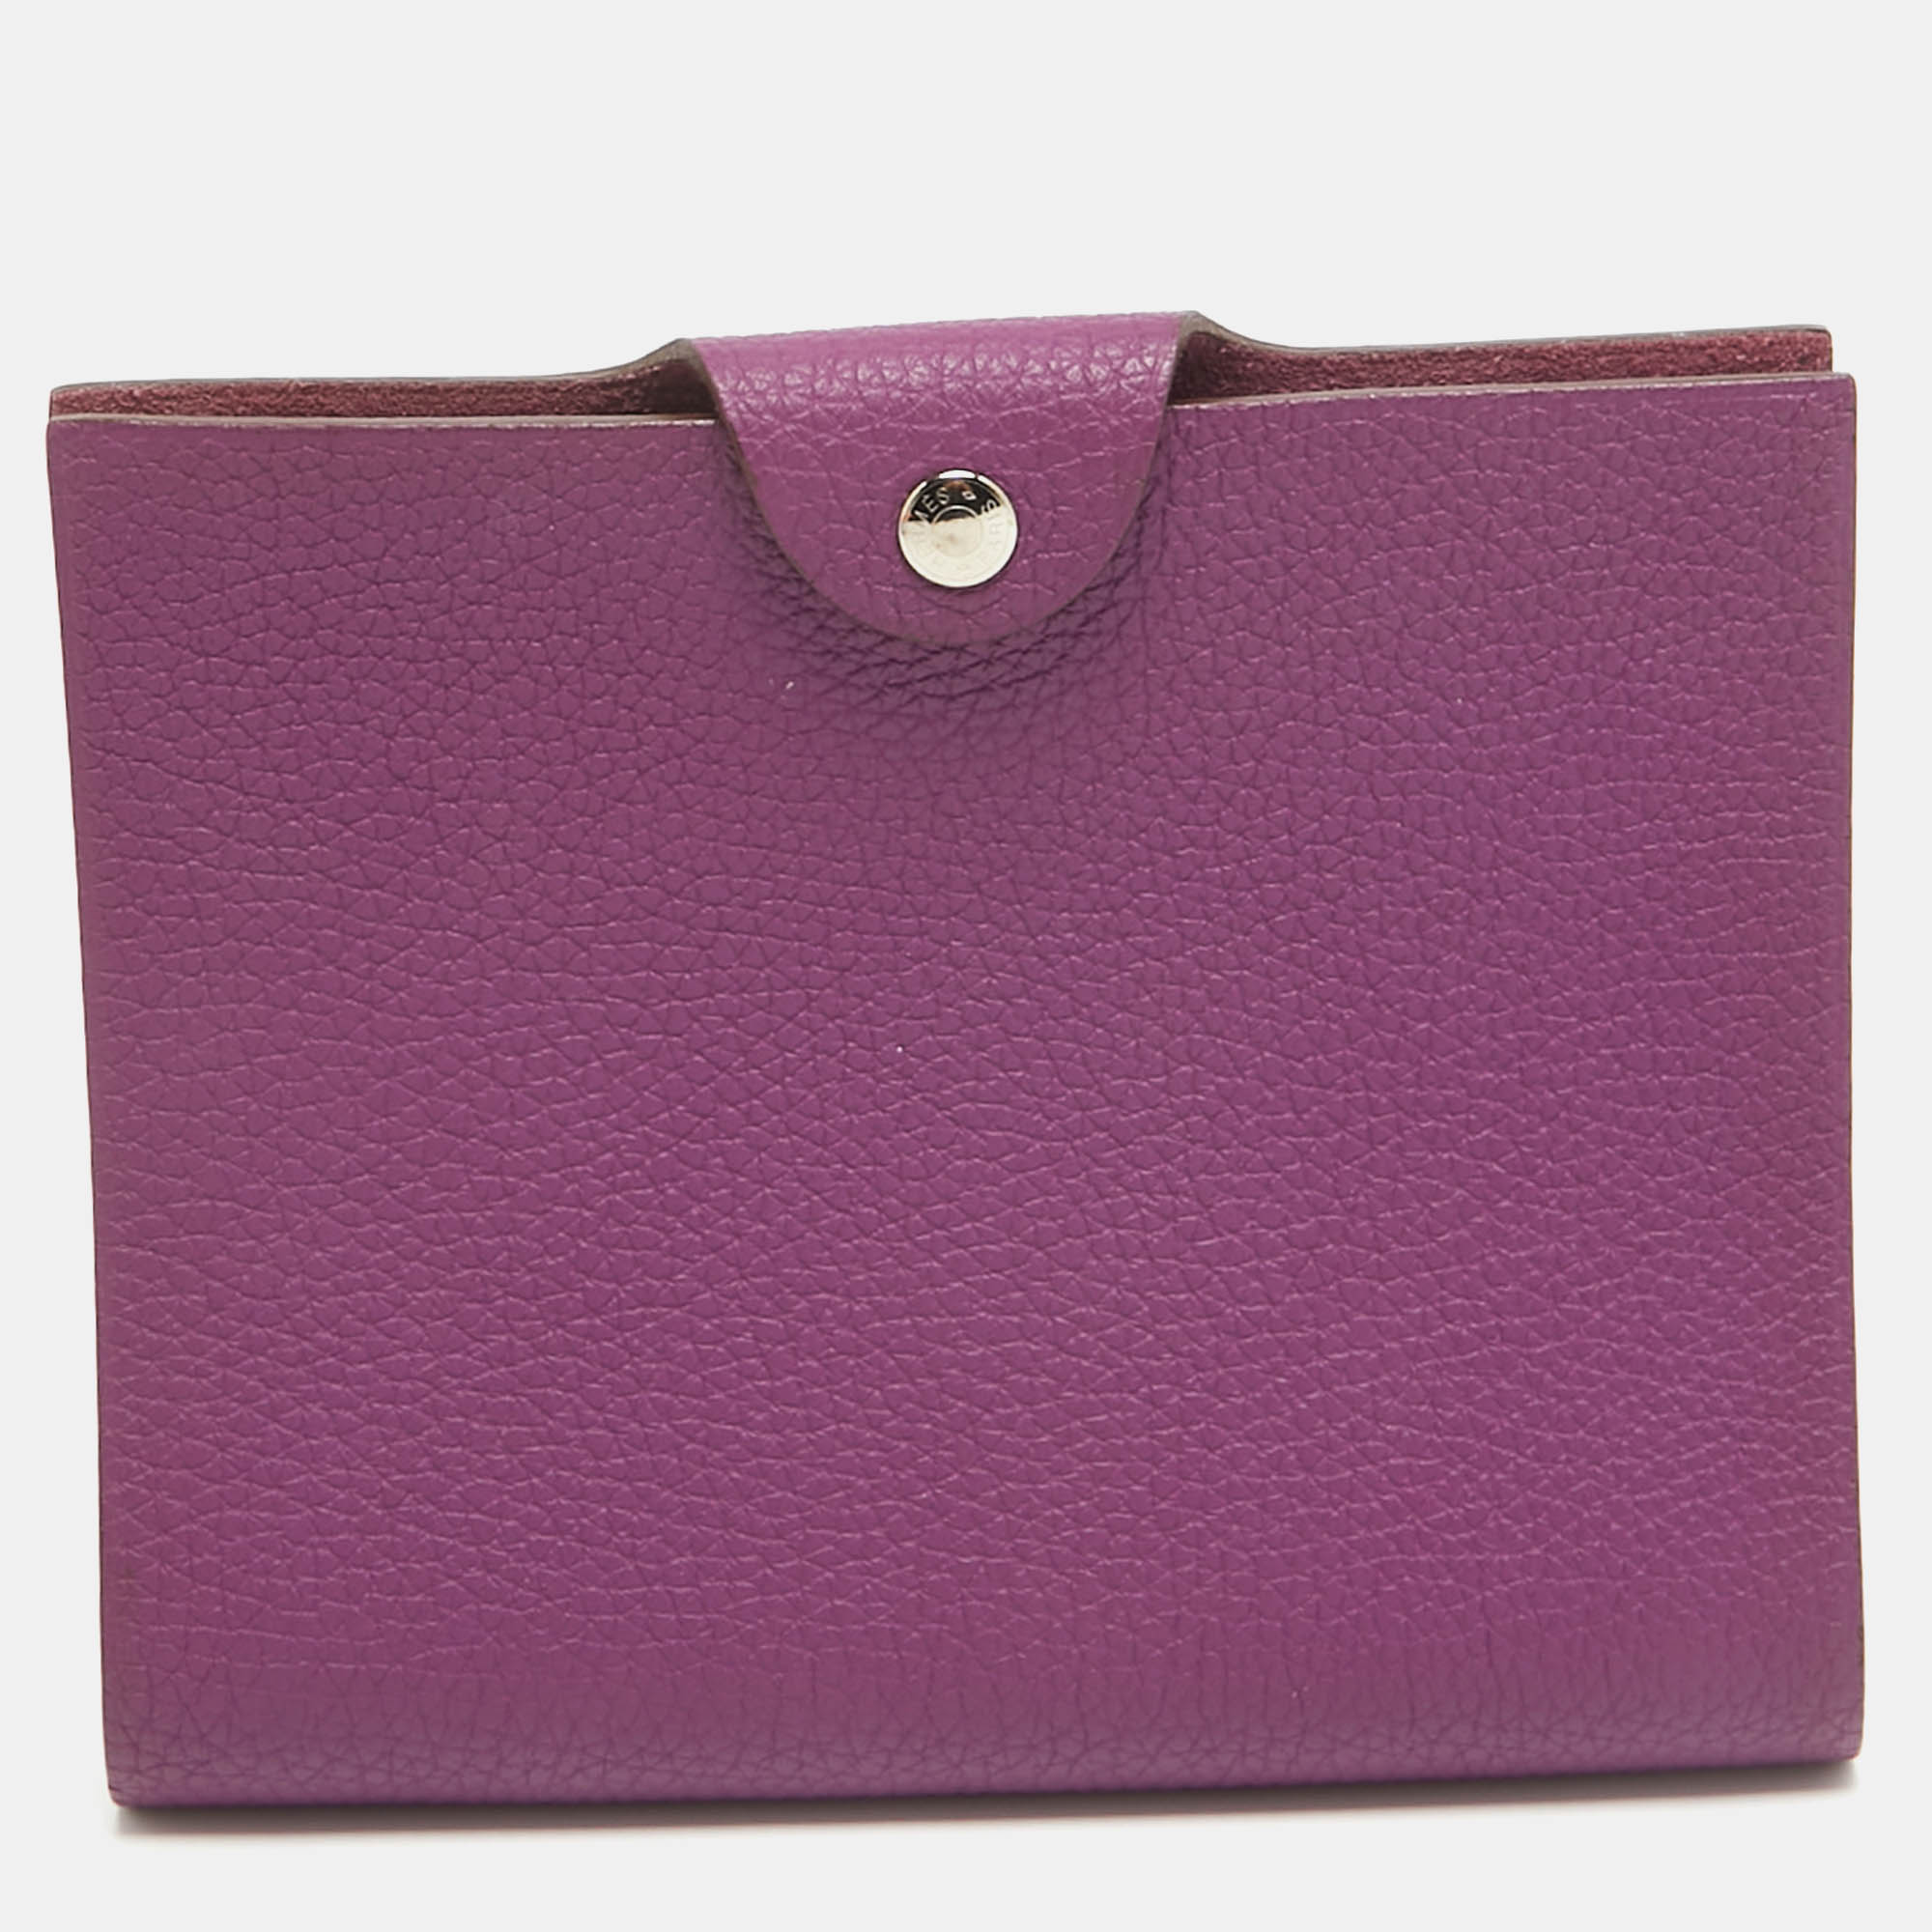 Pre-owned Hermes Anemone Togo Leather Ulysse Pm Notebook Cover In Purple